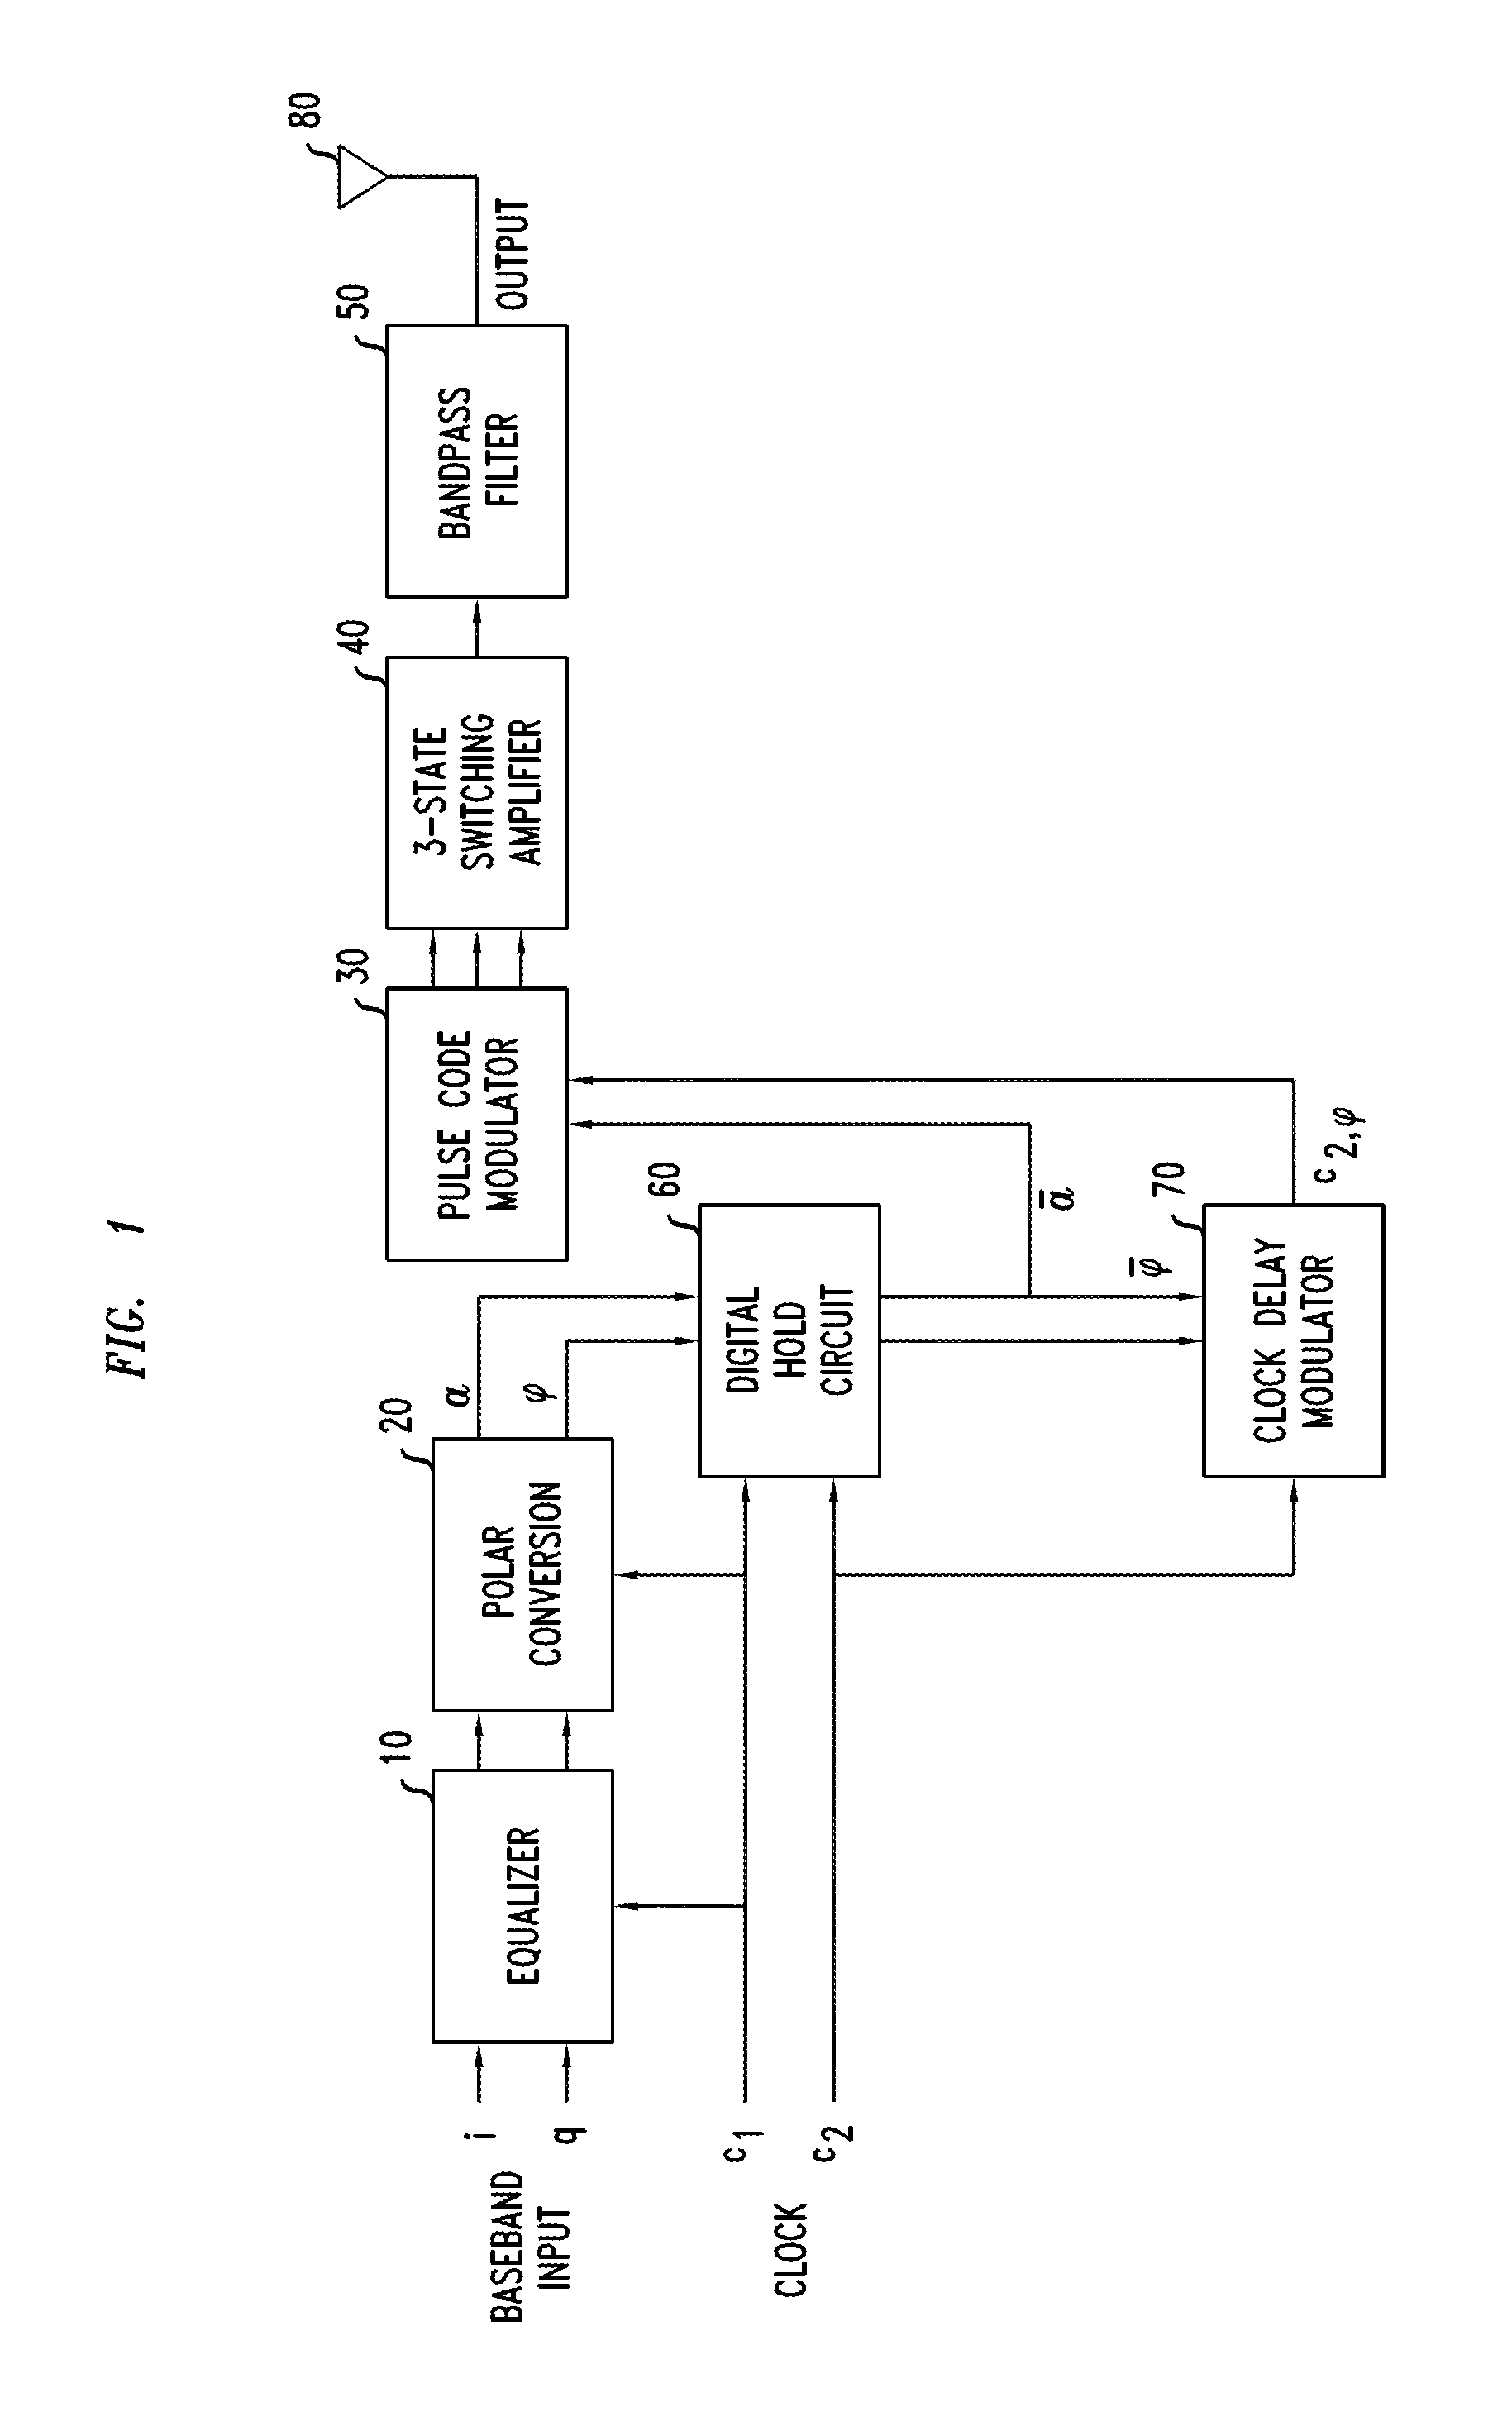 Method And Apparatus Of Switched Amplification Having Improved Efficiency